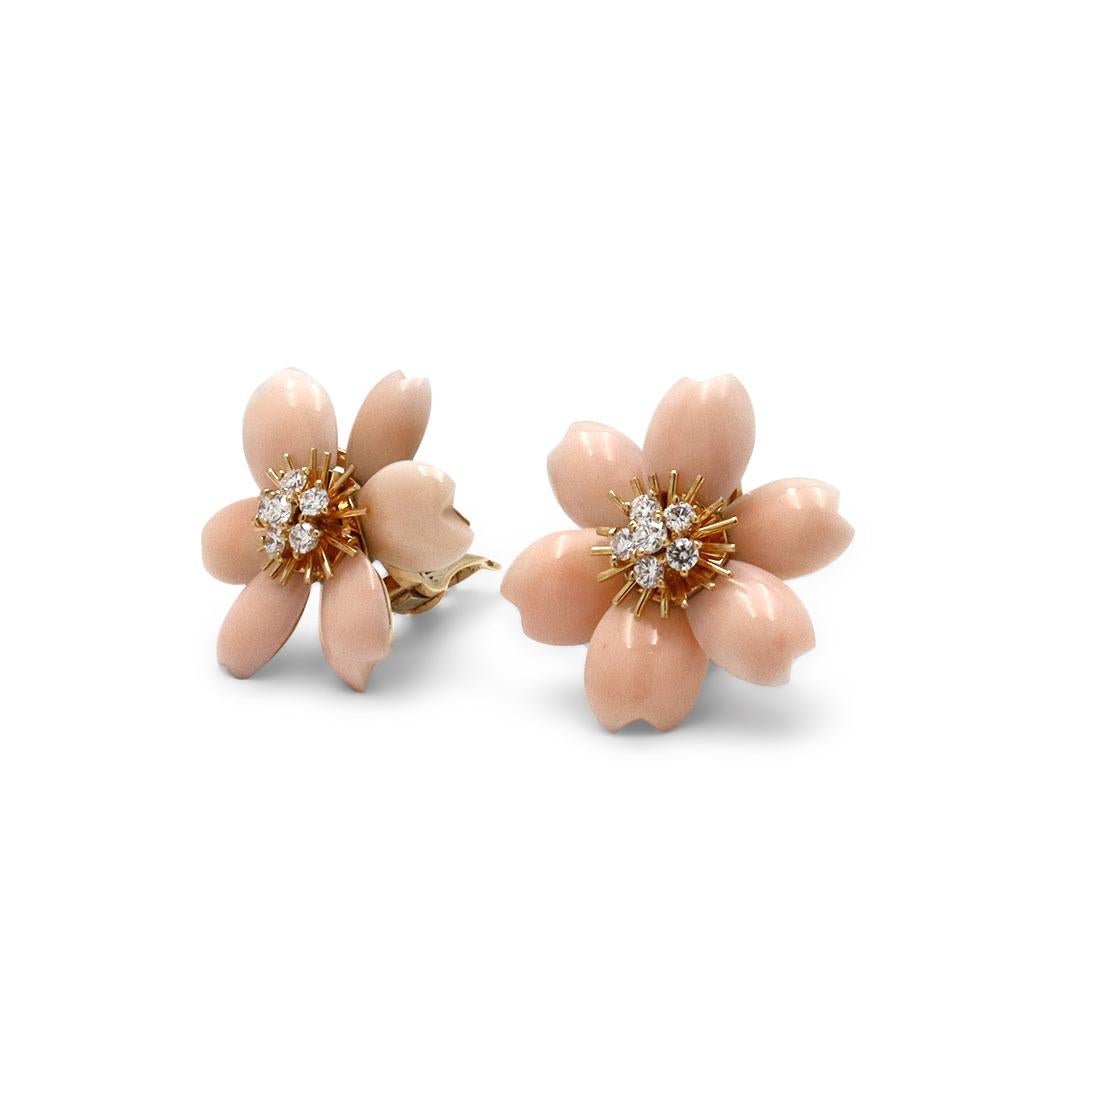 An authentic pair of Van Cleef & Arpels 'Rose de Noël' earclips crafted in 18 karat yellow gold featuring delicately carved pink coral petals. Each earring is set with 6 glittering round brilliant diamonds weighing an estimated 0.98 carats for the